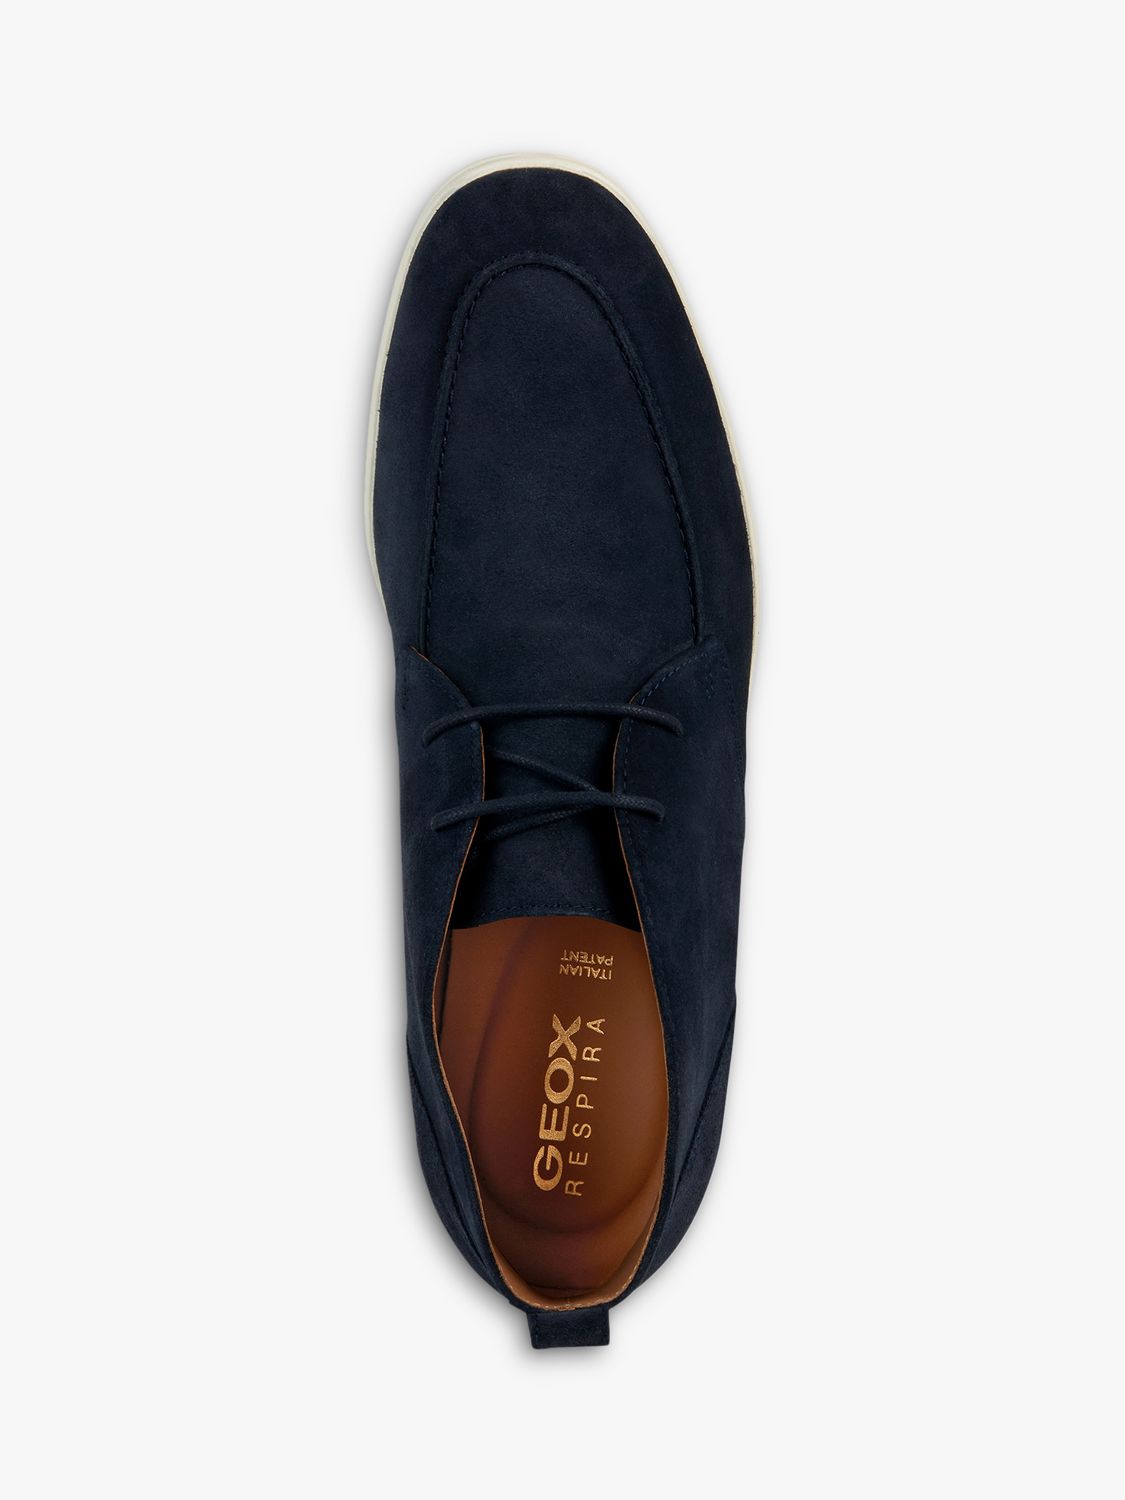 Buy Geox Venzone Suede Chukka Boots Online at johnlewis.com